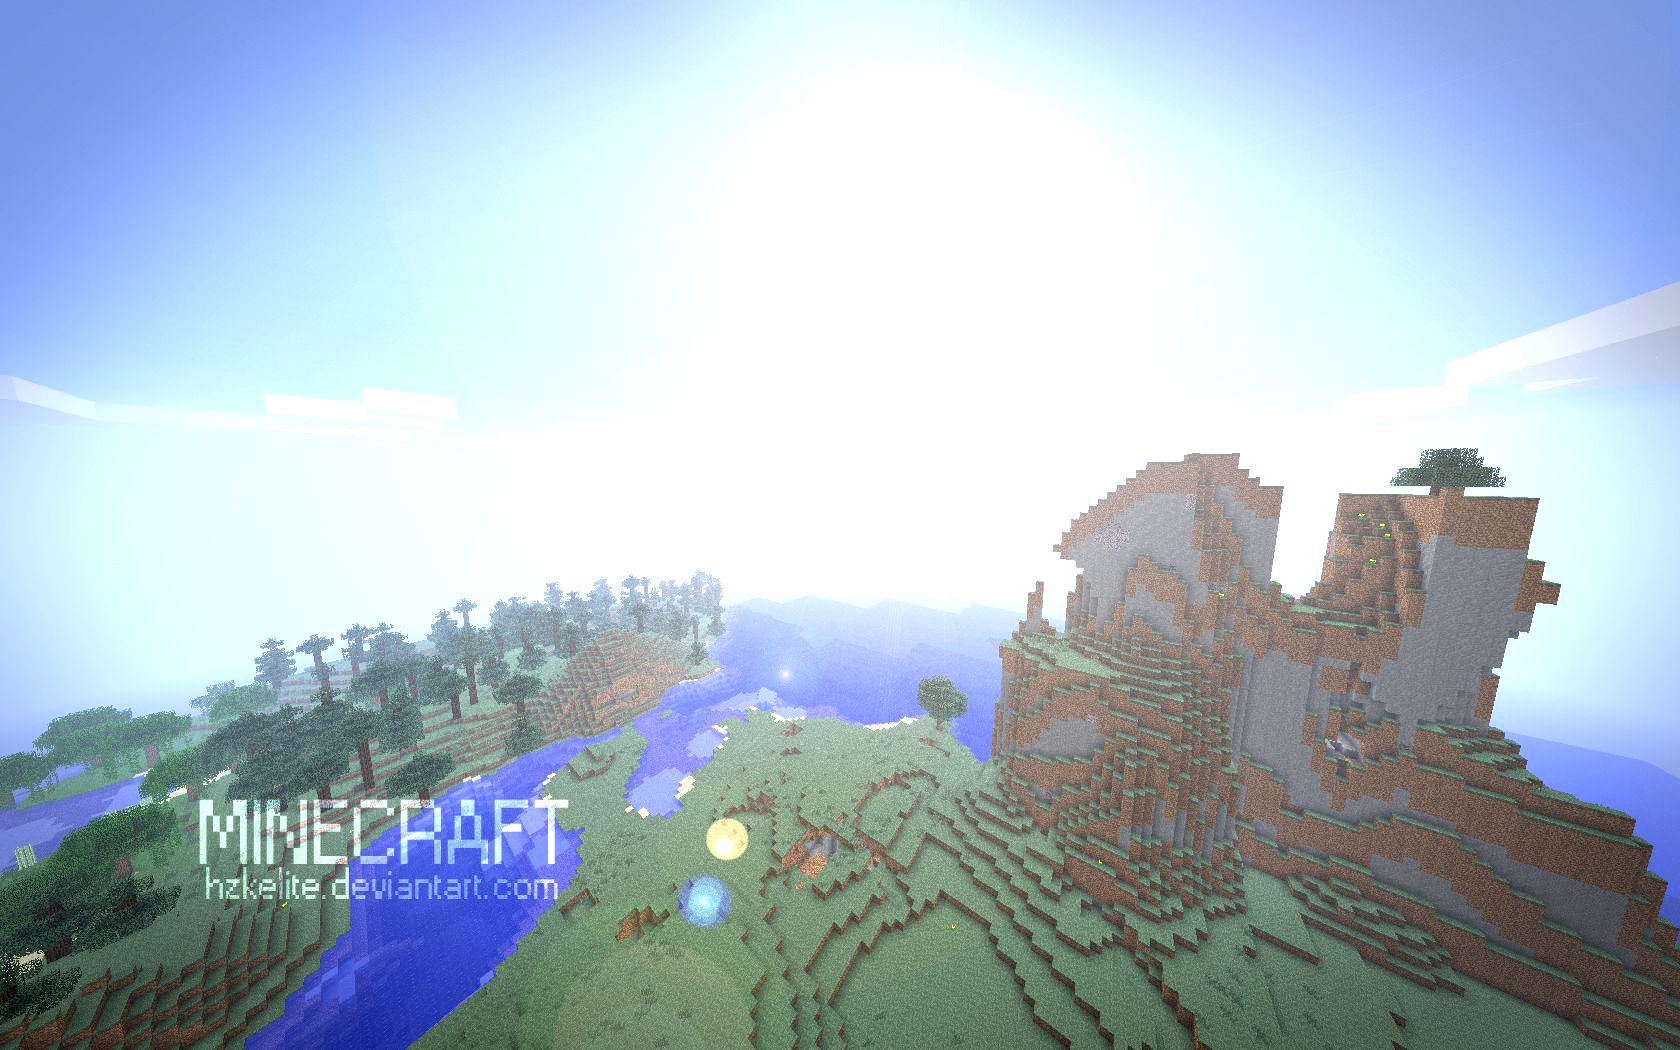 Minecraft landscape with vibrant colors and intricate details.